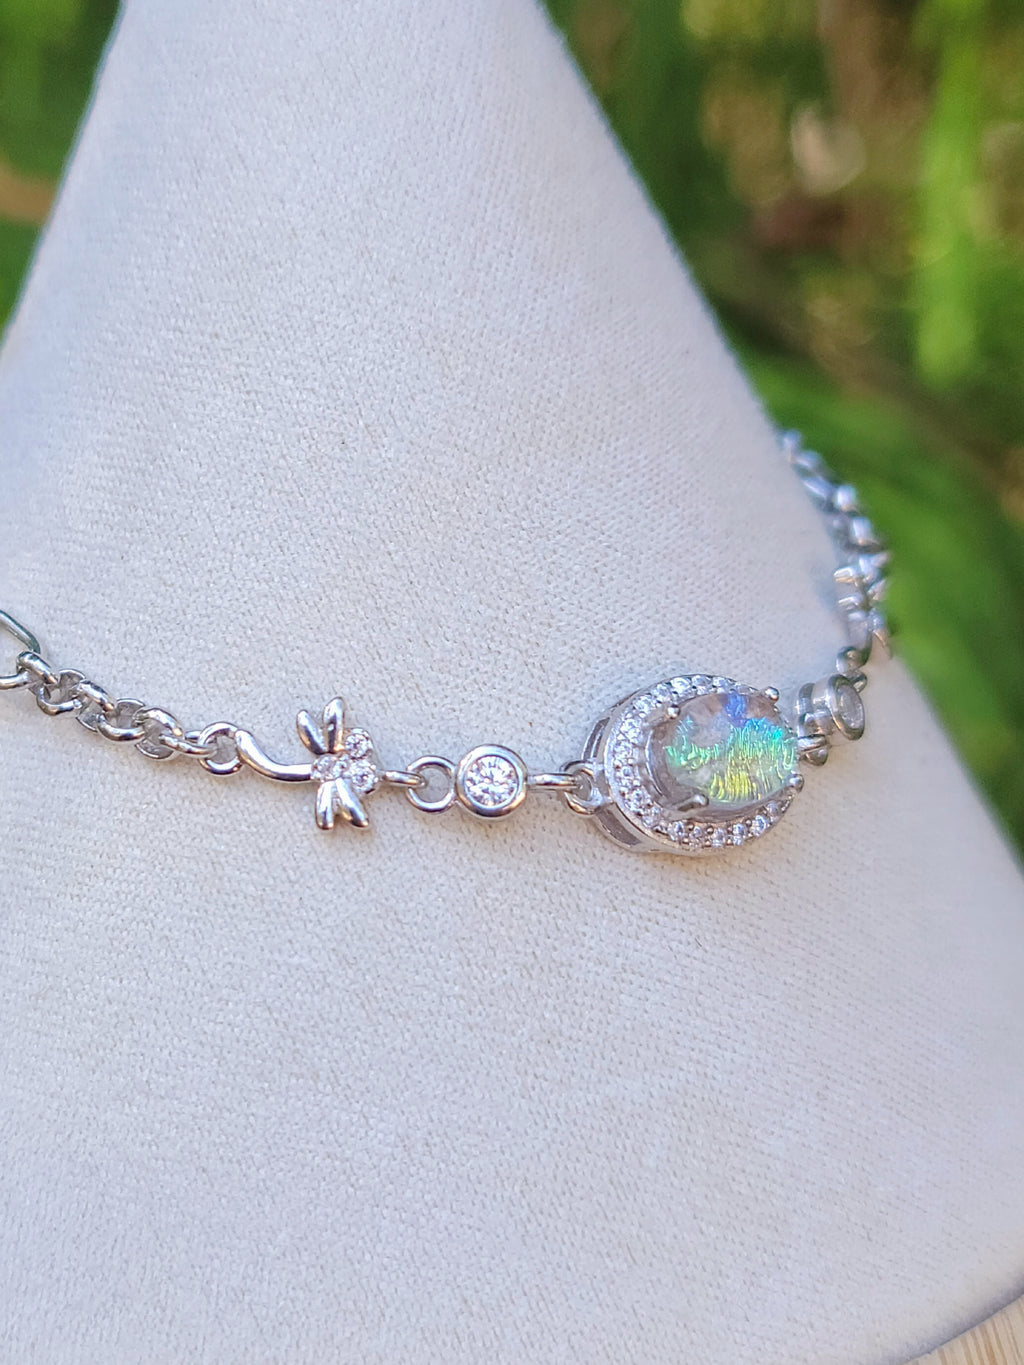 NEW Dragonfly Cremation Ashes InFused Glass Bracelets Link Sterling Silver Chain CZ Accents